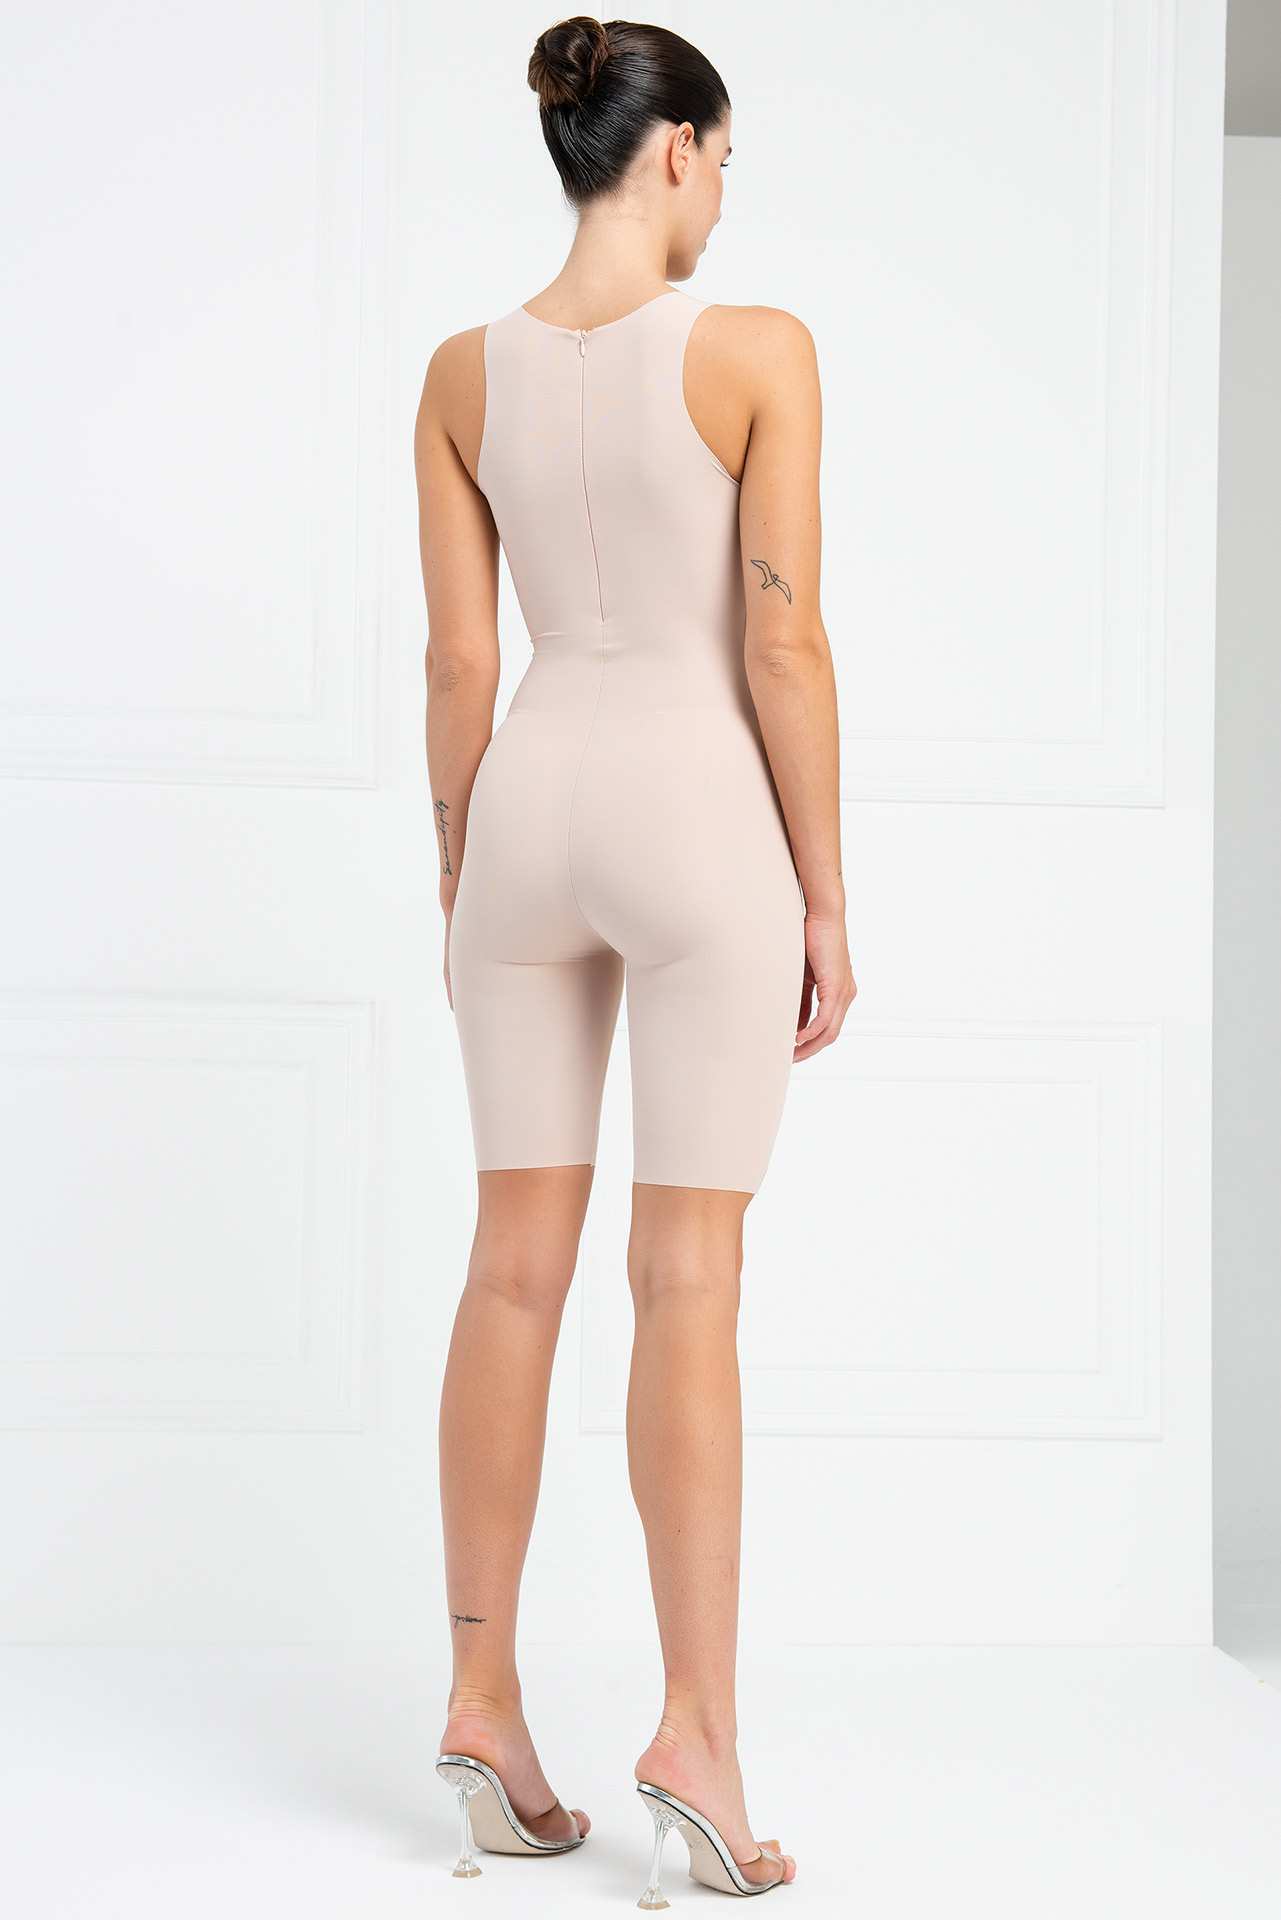 Scoop Neck Mid Thigh Full Body Shaper in Nude